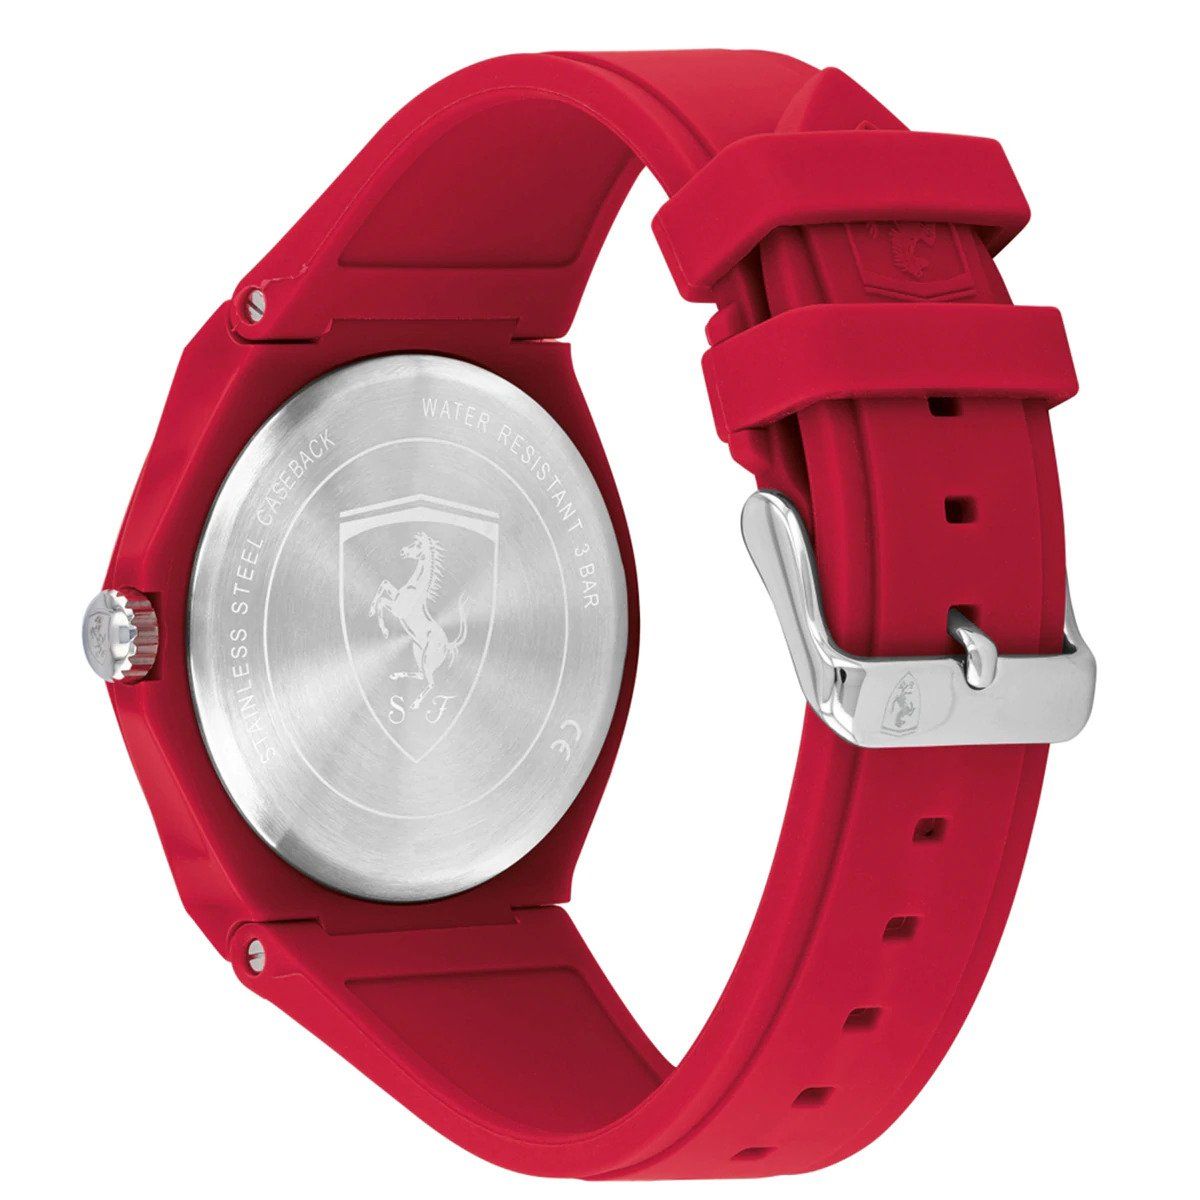 This Ferrari Aspire Multi Dial Watch for Men is the perfect timepiece to wear or to gift. It's Red 43 mm Round case combined with the comfortable Red Rubber watch band will ensure you enjoy this stunning timepiece without any compromise. Operated by a high quality Quartz movement and water resistant to 3 bars, your watch will keep ticking. Rubber watch band make it comfortable to wear and lead you to edge sport fashion. Perfect for both indoor and outdoor activities. -The watch has a calendar function: Day-Date, 24-hour Display High quality 21 cm length and 22 mm width Red Rubber strap with a Buckle Case diameter: 43 mm,case thickness: 12 mm, case colour: Red and dial colour: Black